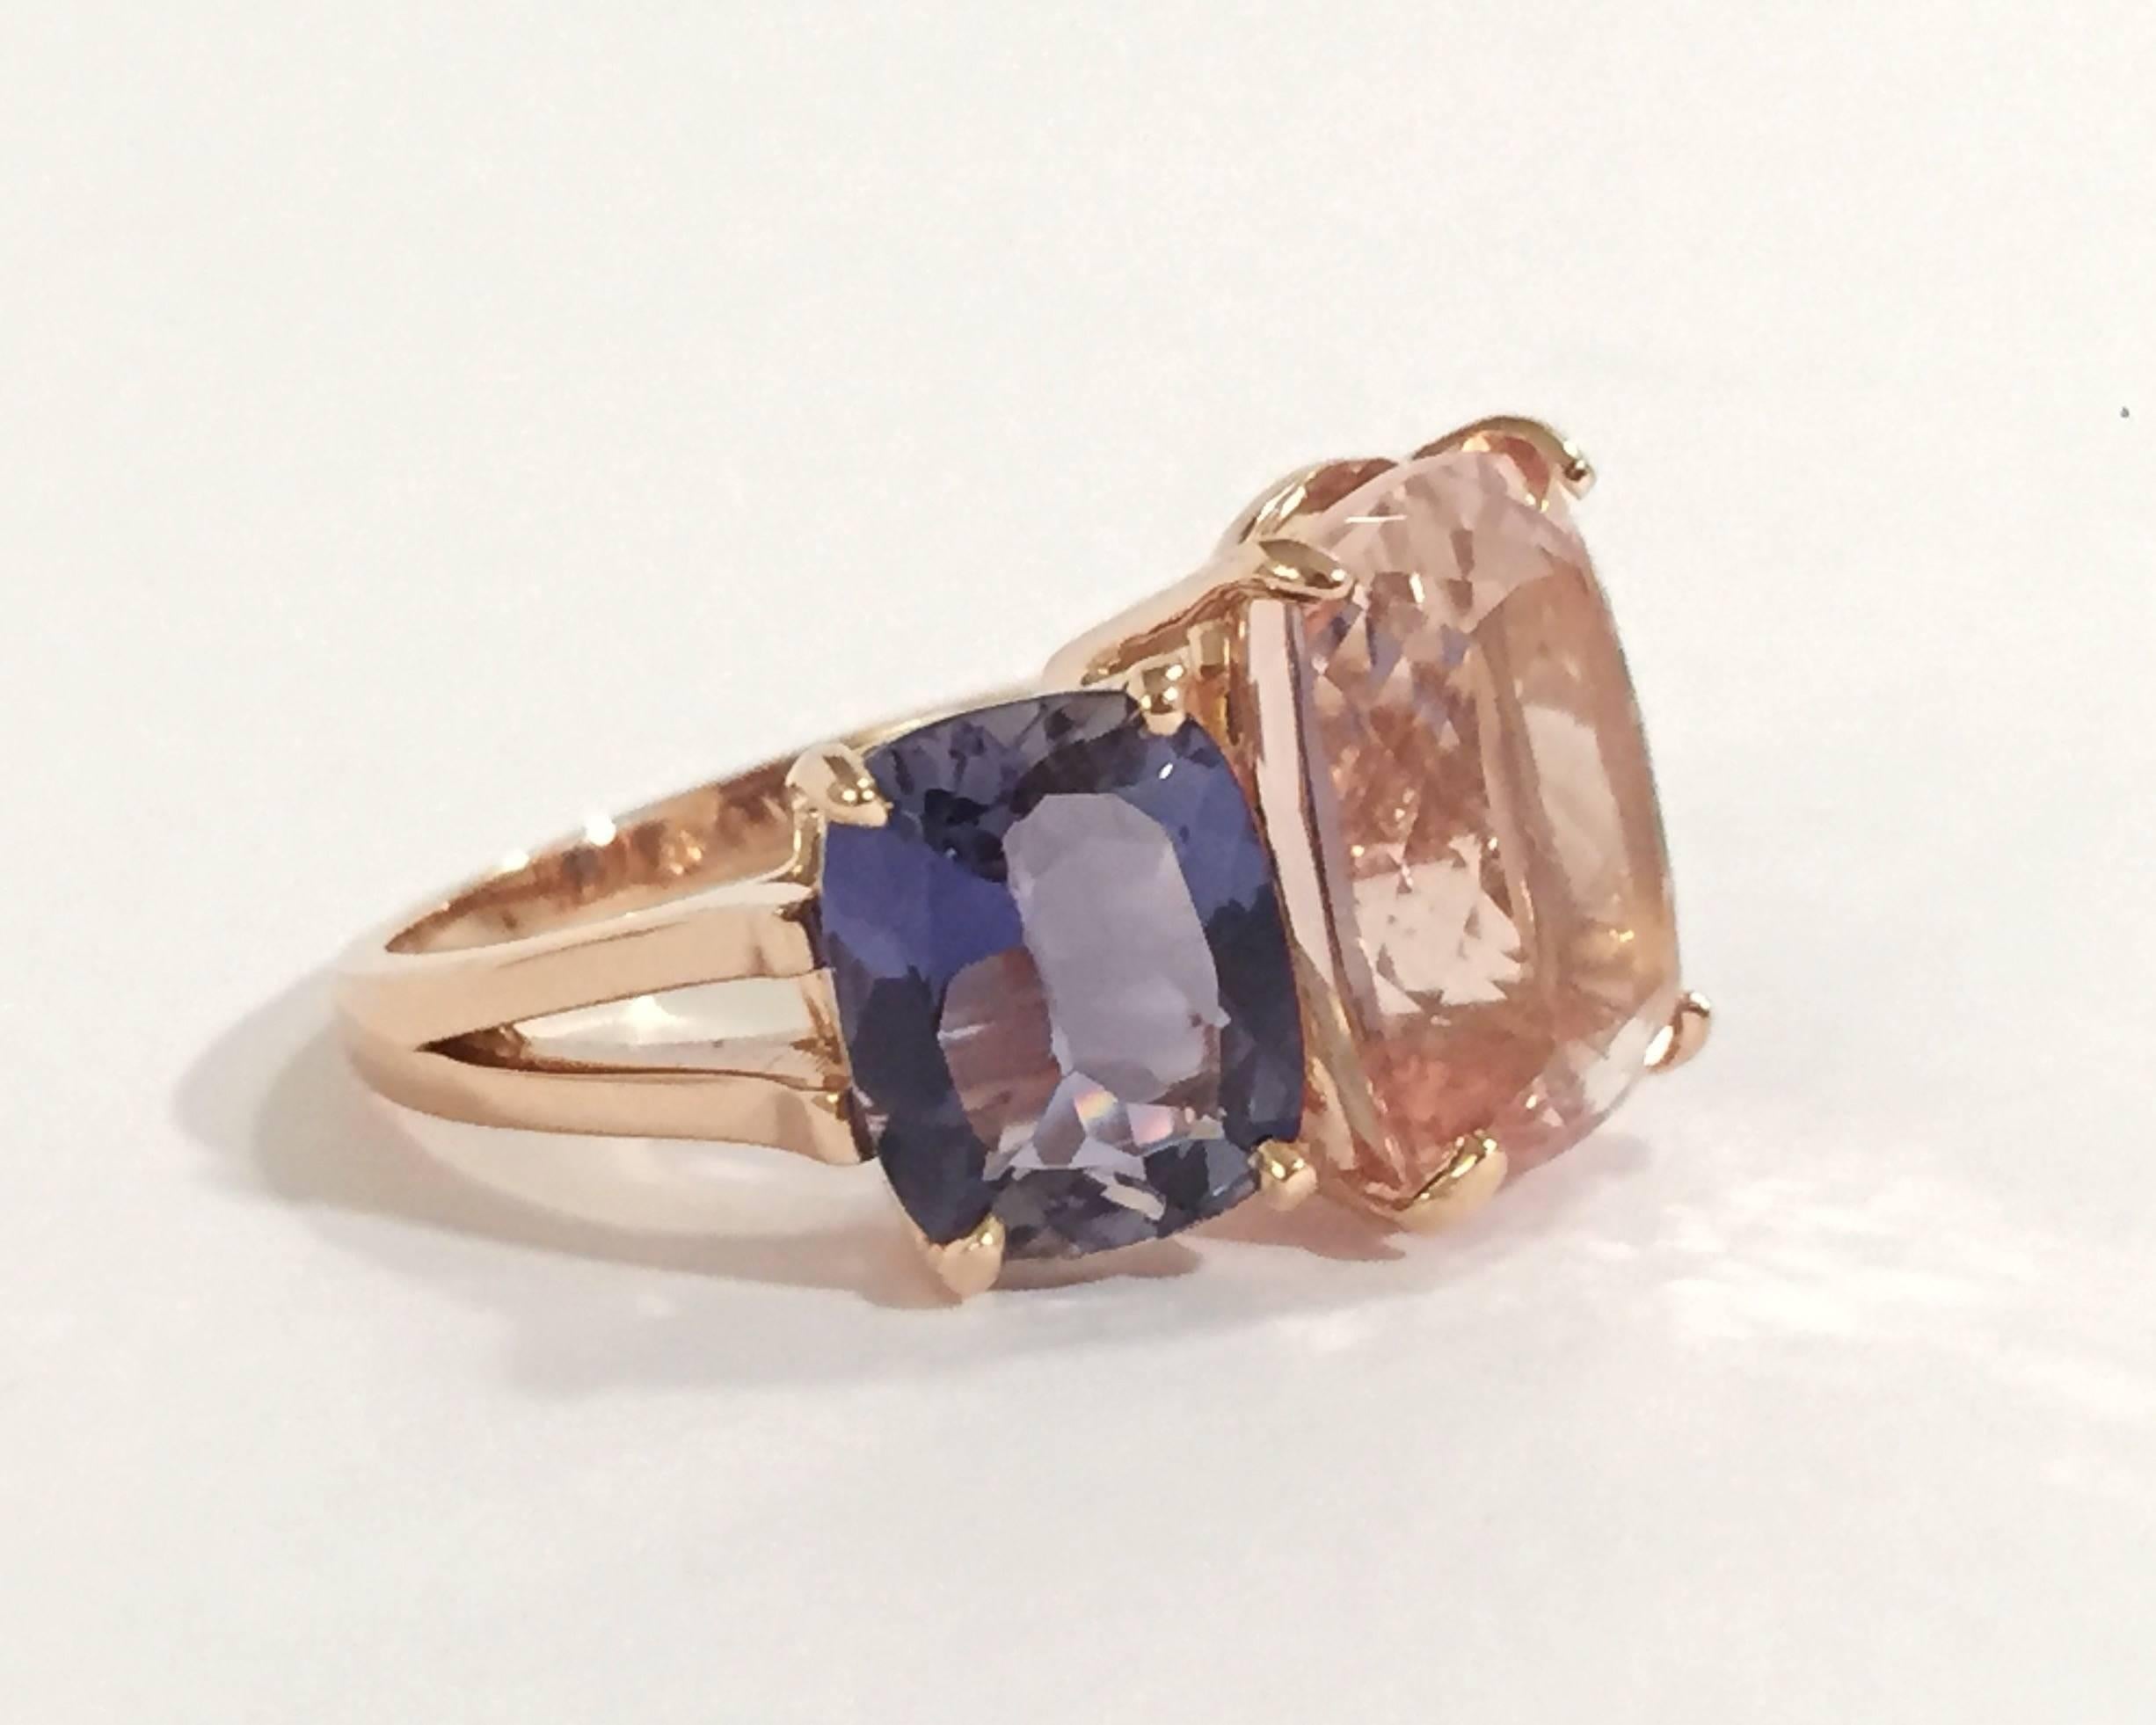 18kt Rose Gold Three Stone faceted Cushion Ring with center Morganite and two Iolite finished with a tapered split shank.

This elegant cocktail ring measures 1 1/4" across the top.  The Center Morganite measures 5/8"; tall and